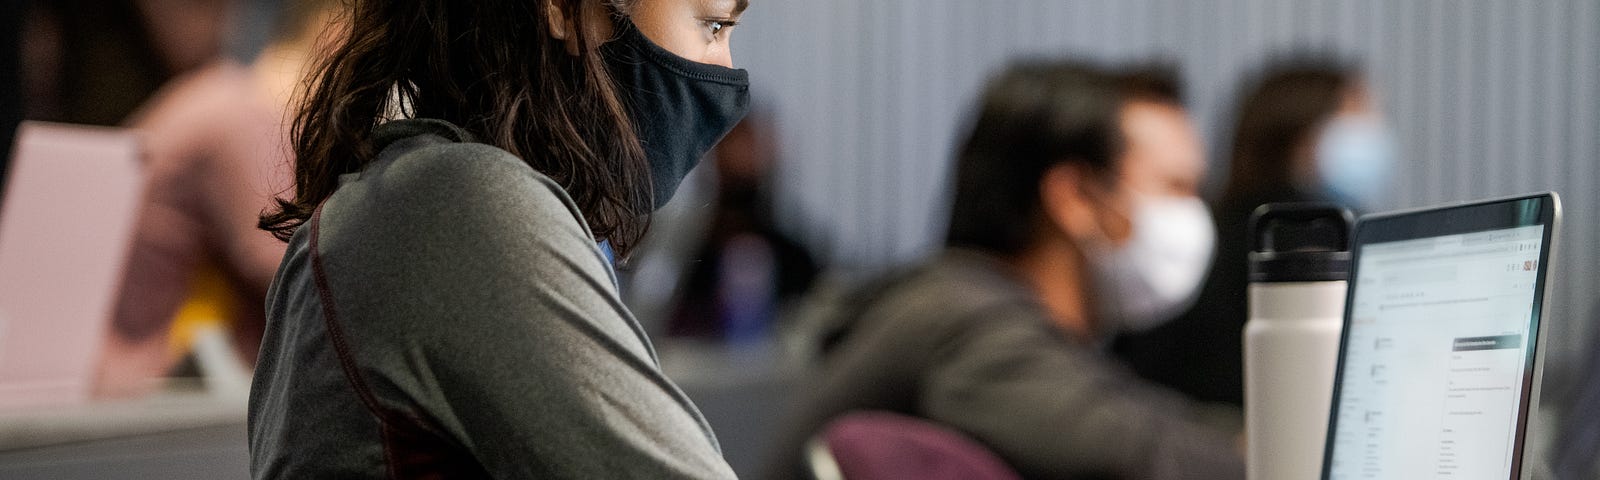 A woman wears a face mask while typing on her laptop. She is surrounded by other masked students in a lecture hall.